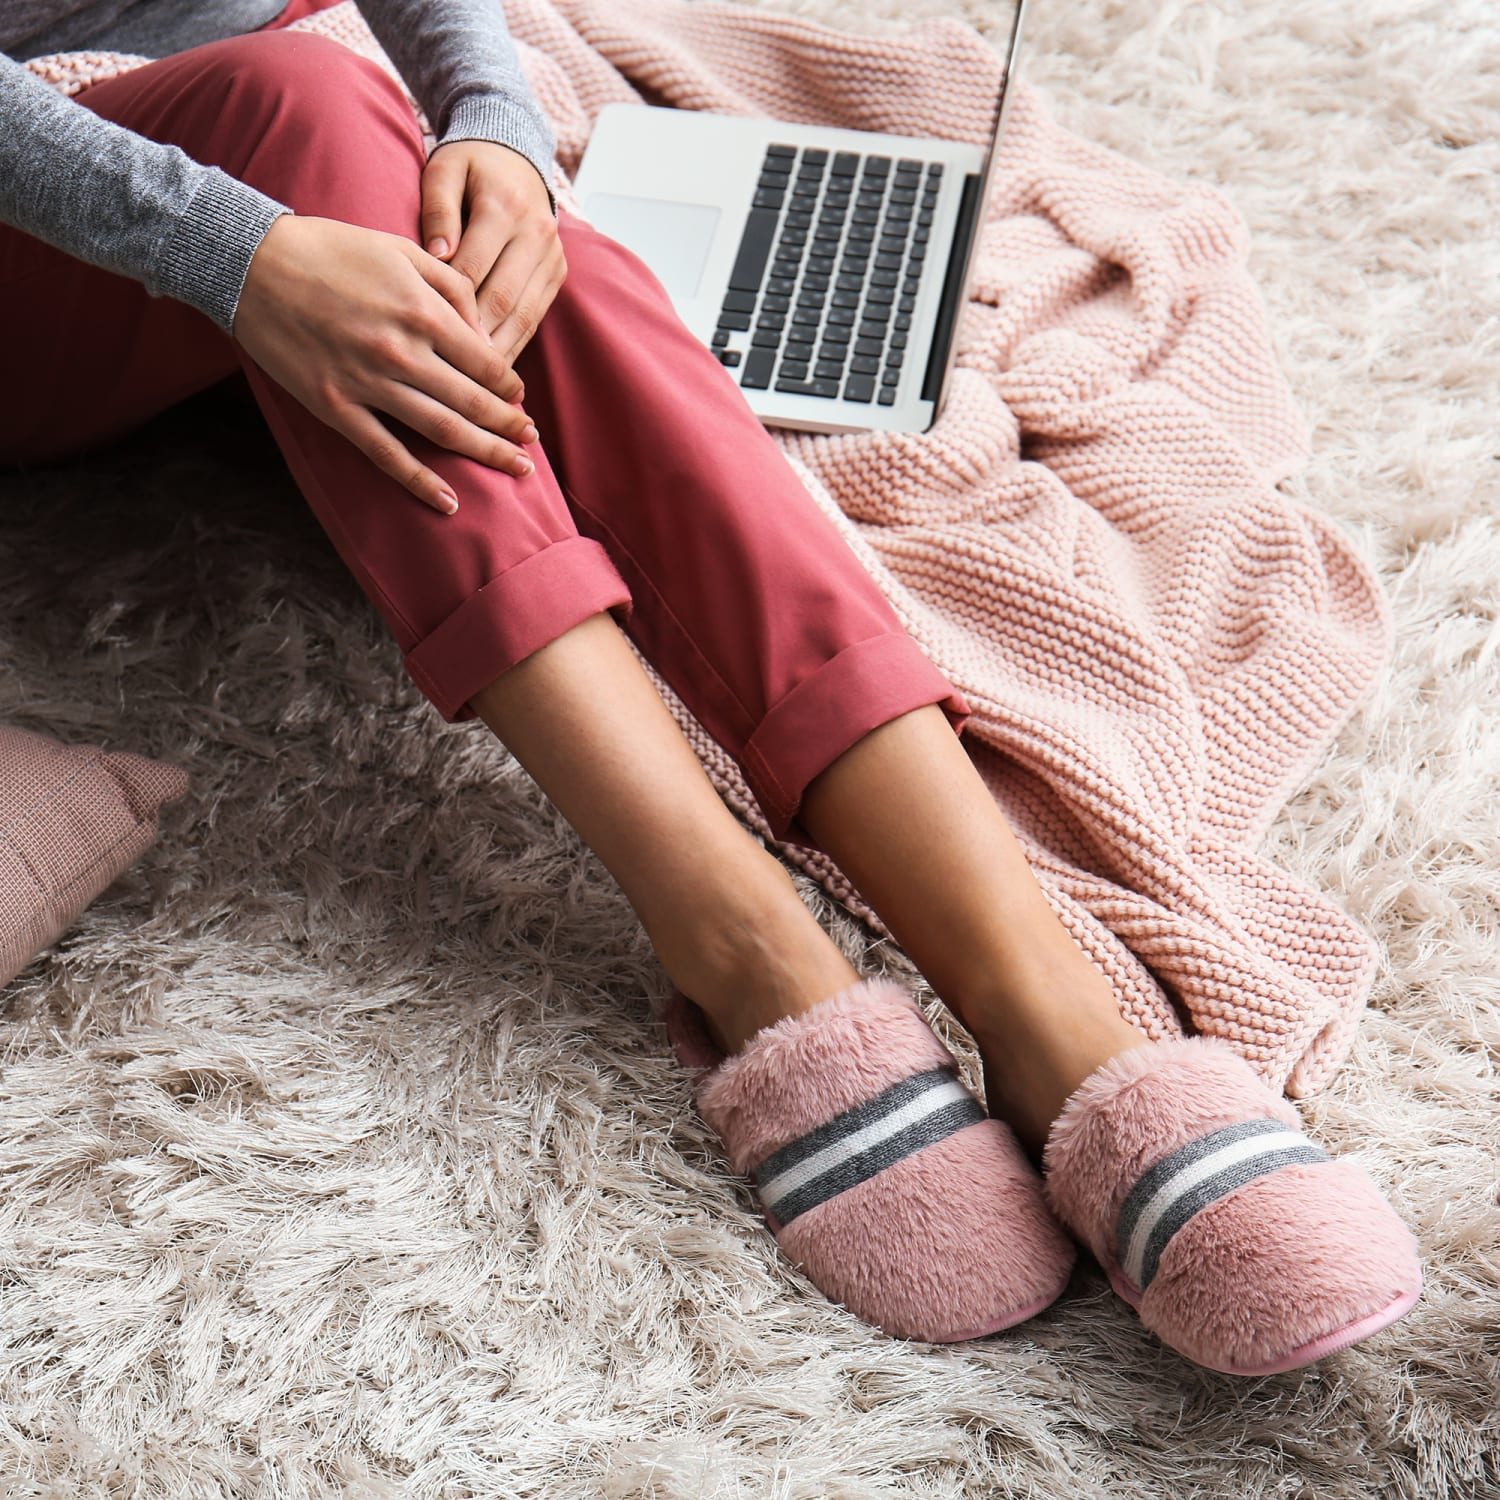 Best slippers for working from home 